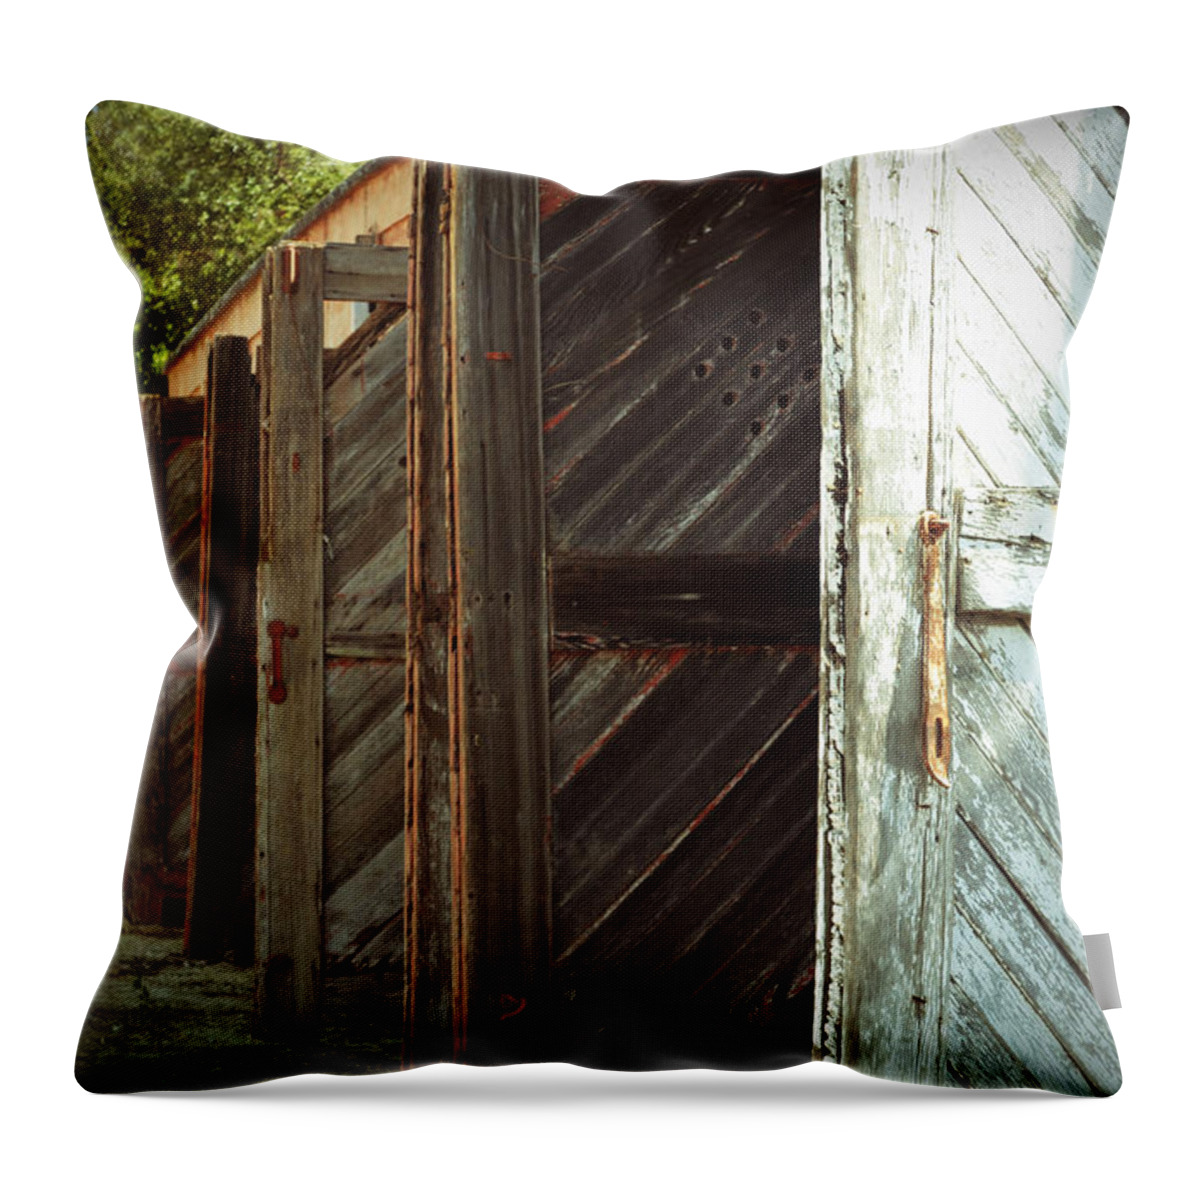  Building Throw Pillow featuring the photograph Eight Doors by Holly Blunkall